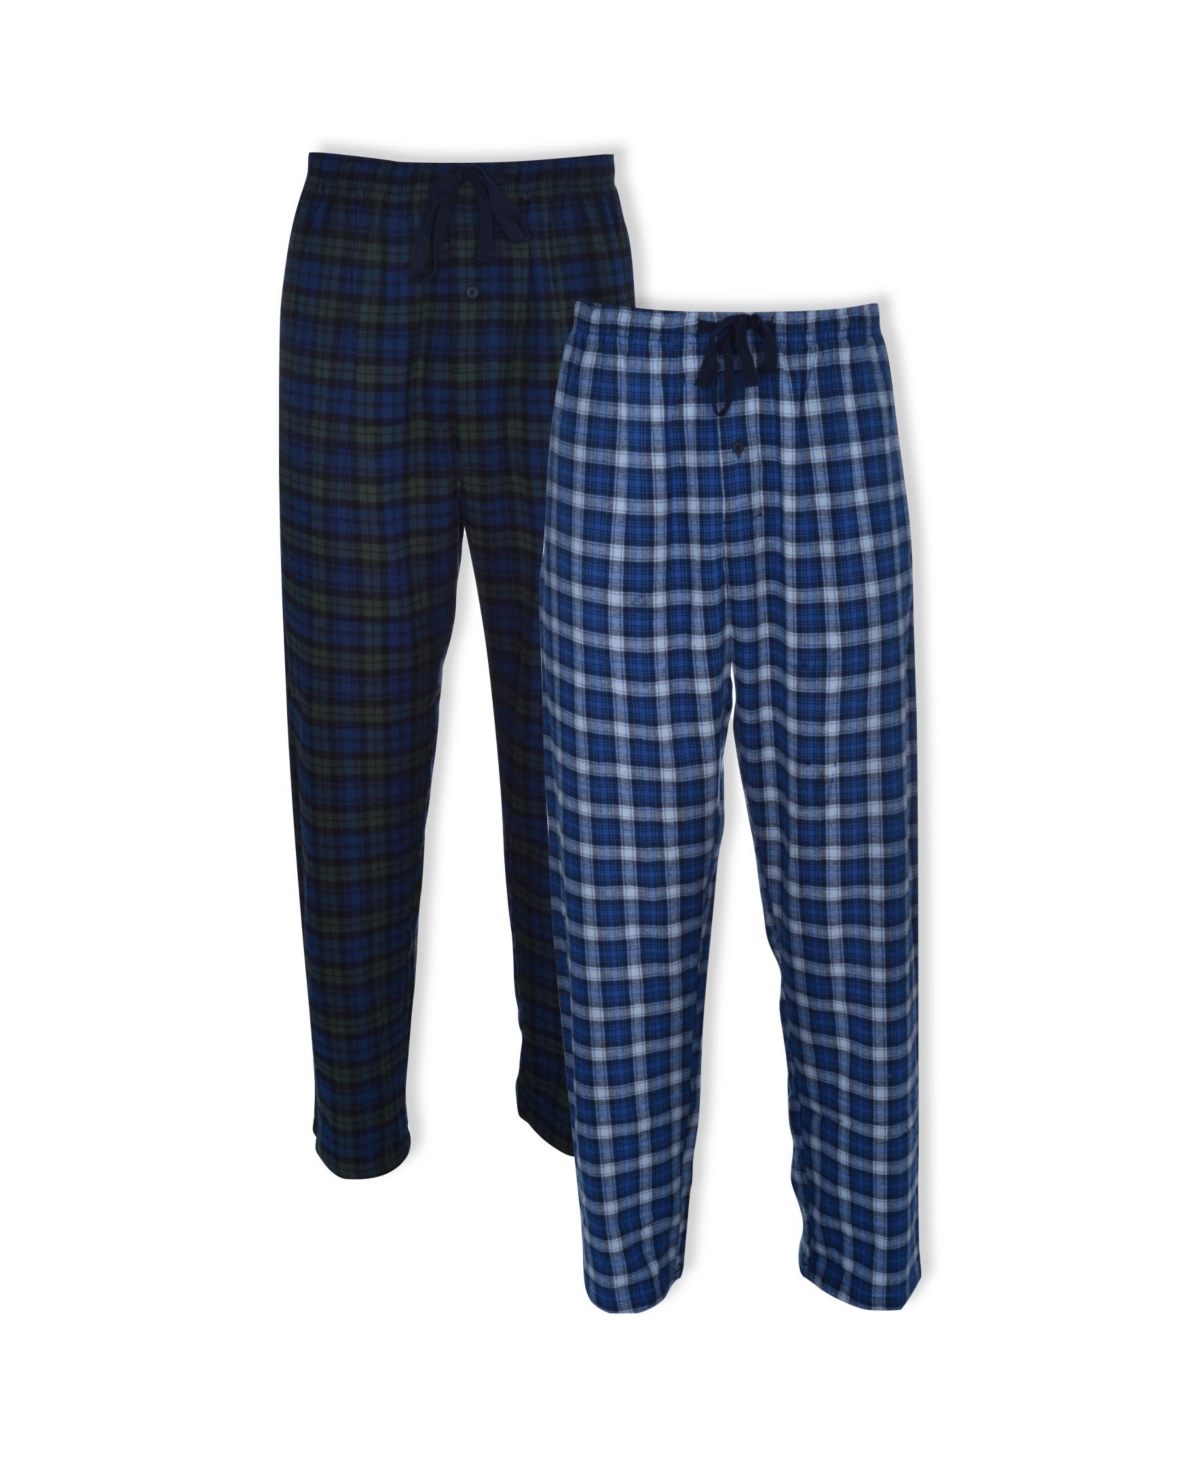 Hanes Men's Big and Tall Flannel Sleep Pant, 2 Pack - Red/Black Buffalo Check and Black Plaid